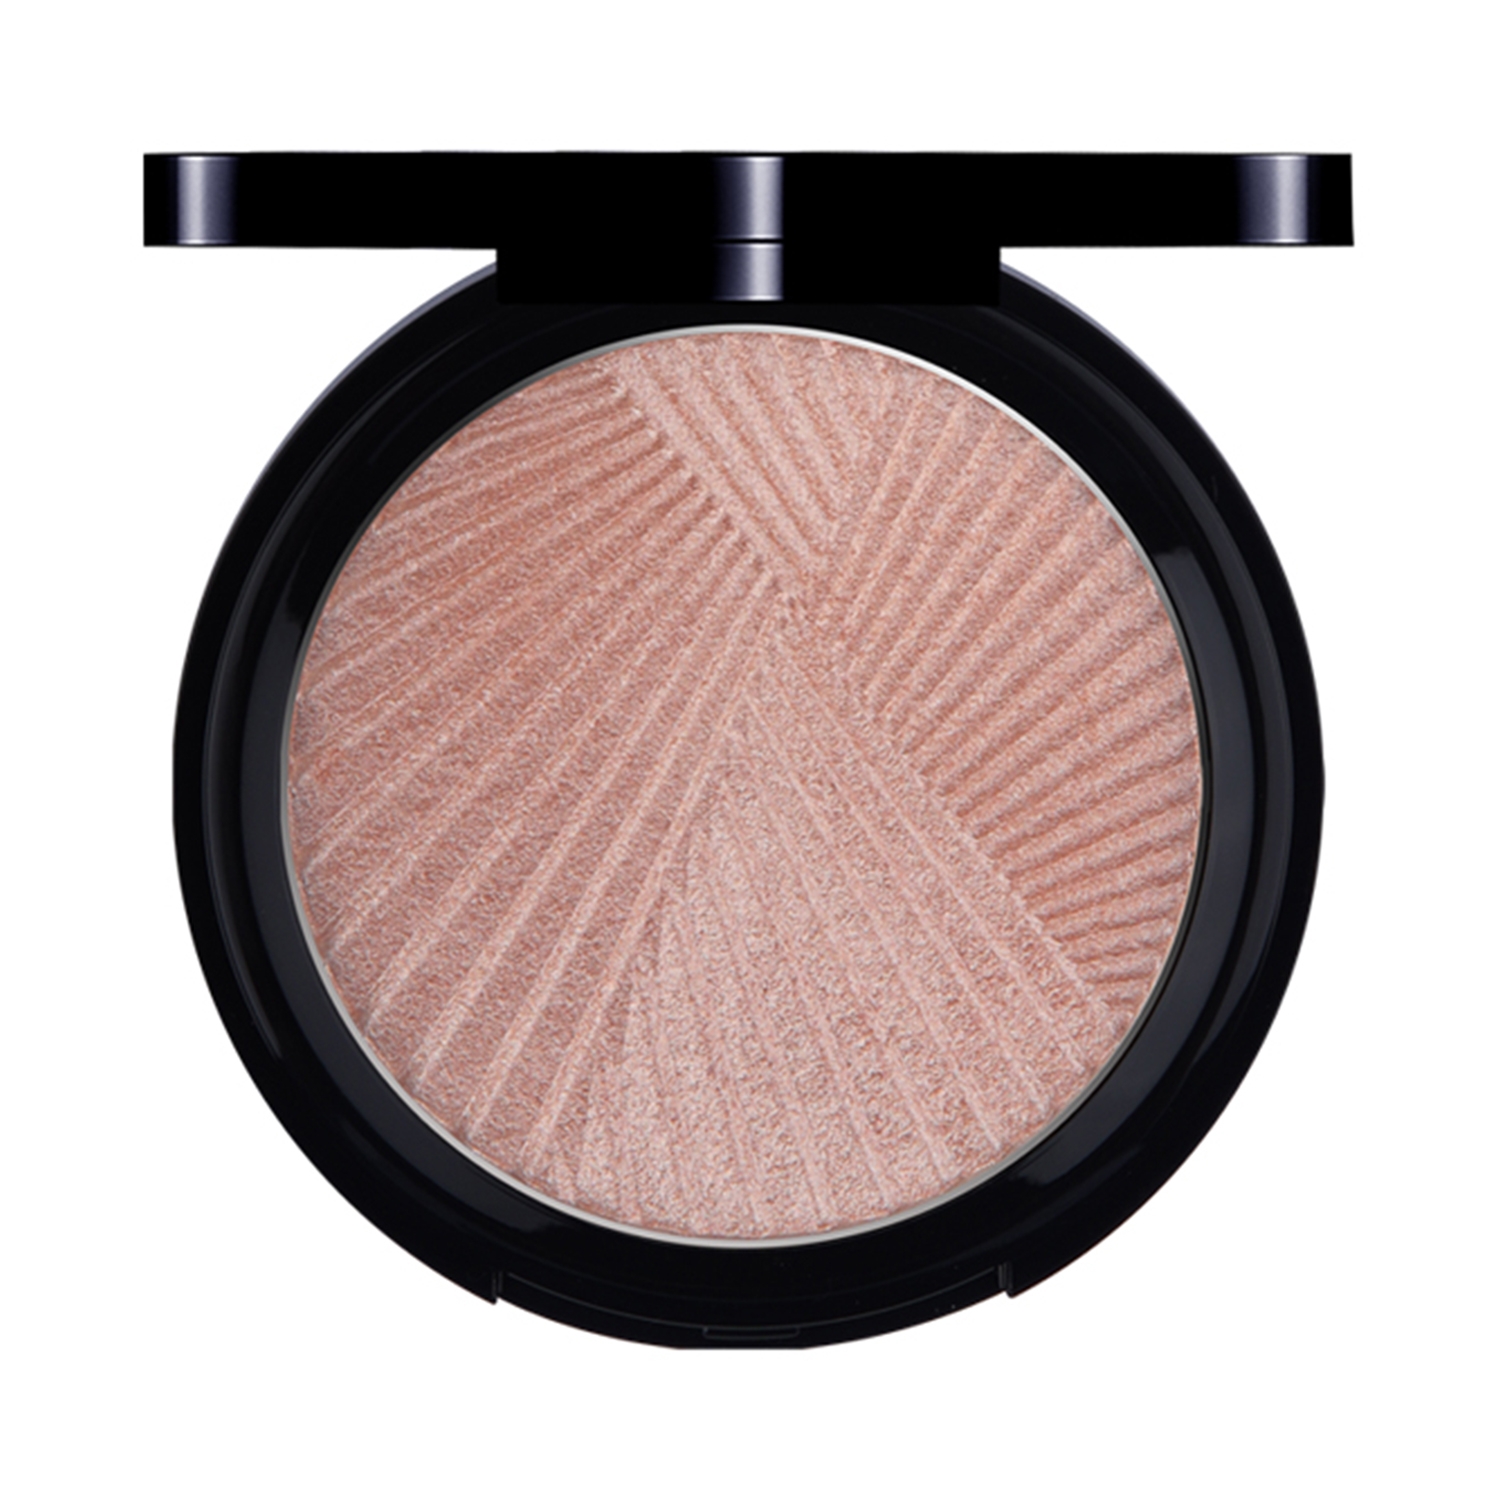 Daily Life Forever52 | Daily Life Forever52 Sunkissed Illuminator/ Highlighter ILU004 (8gm)